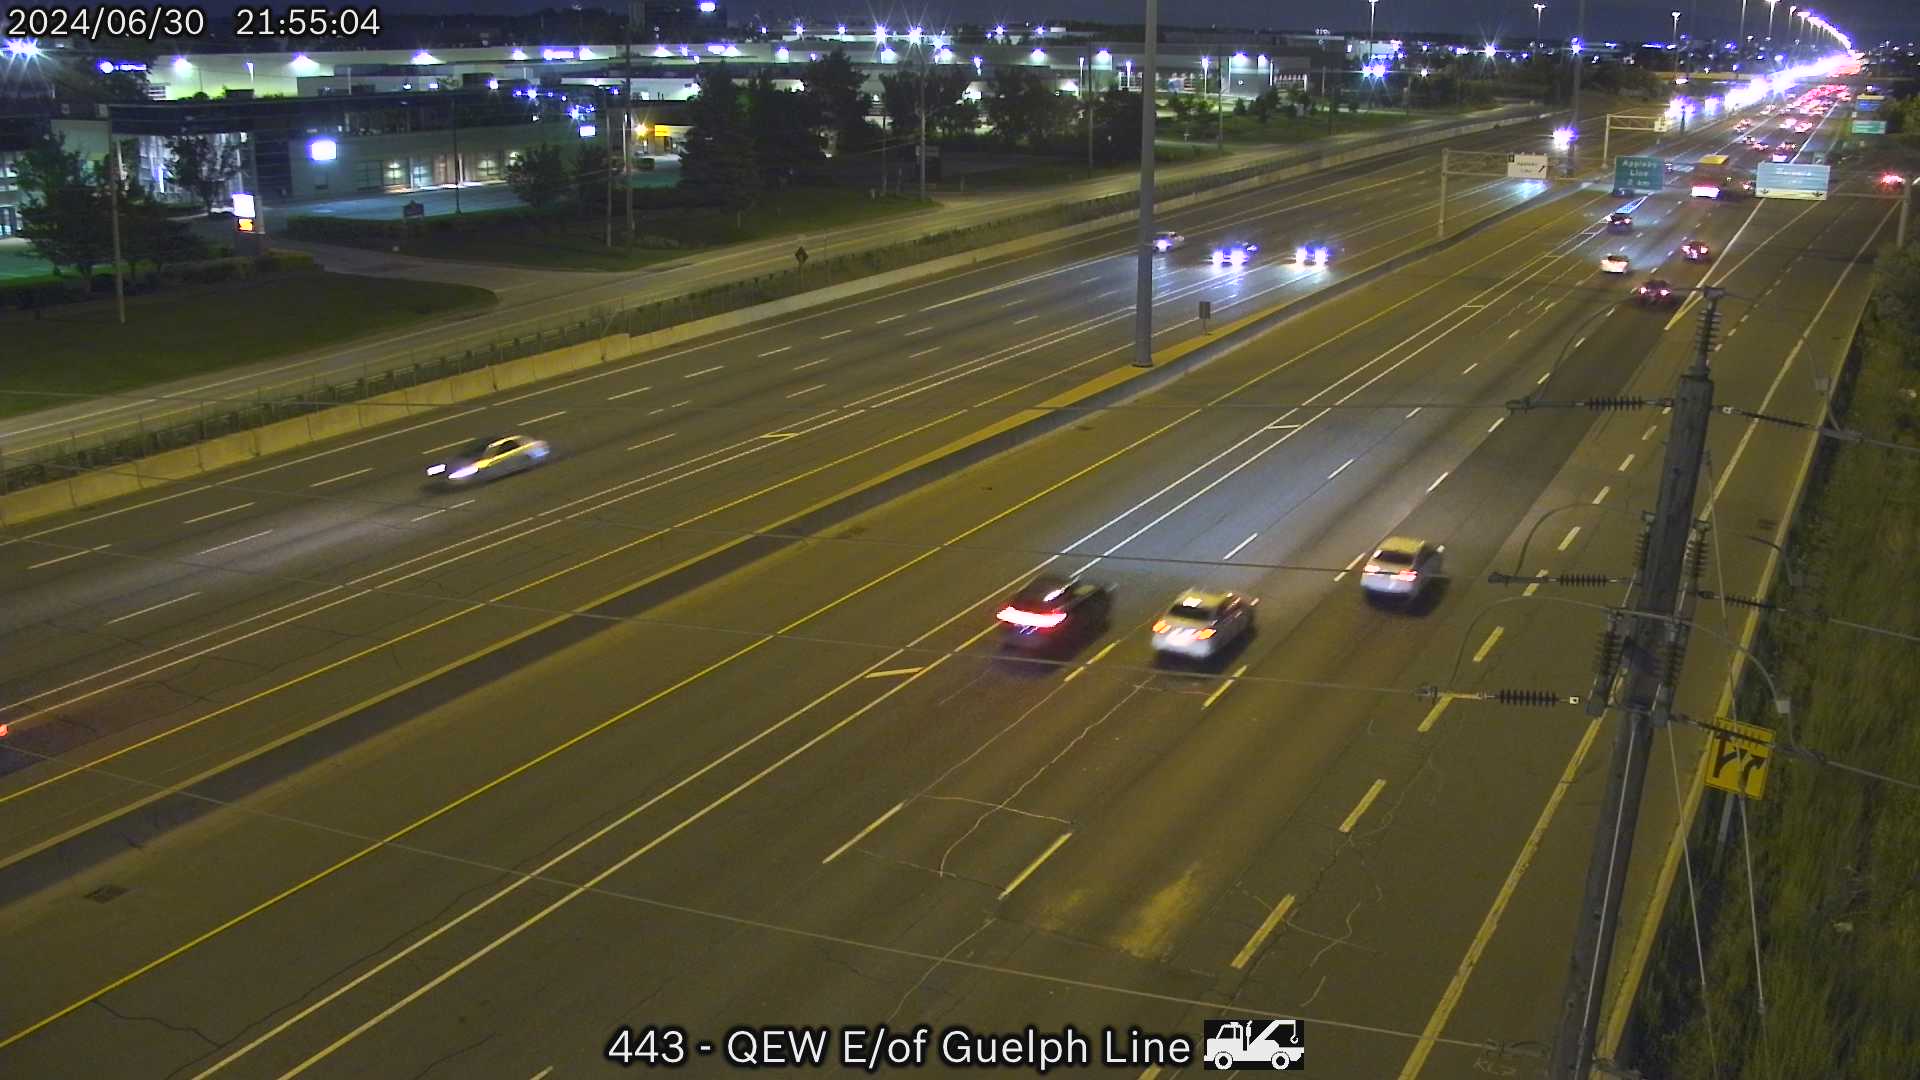 QEW between Guelph Line and Walkers Line Traffic Camera